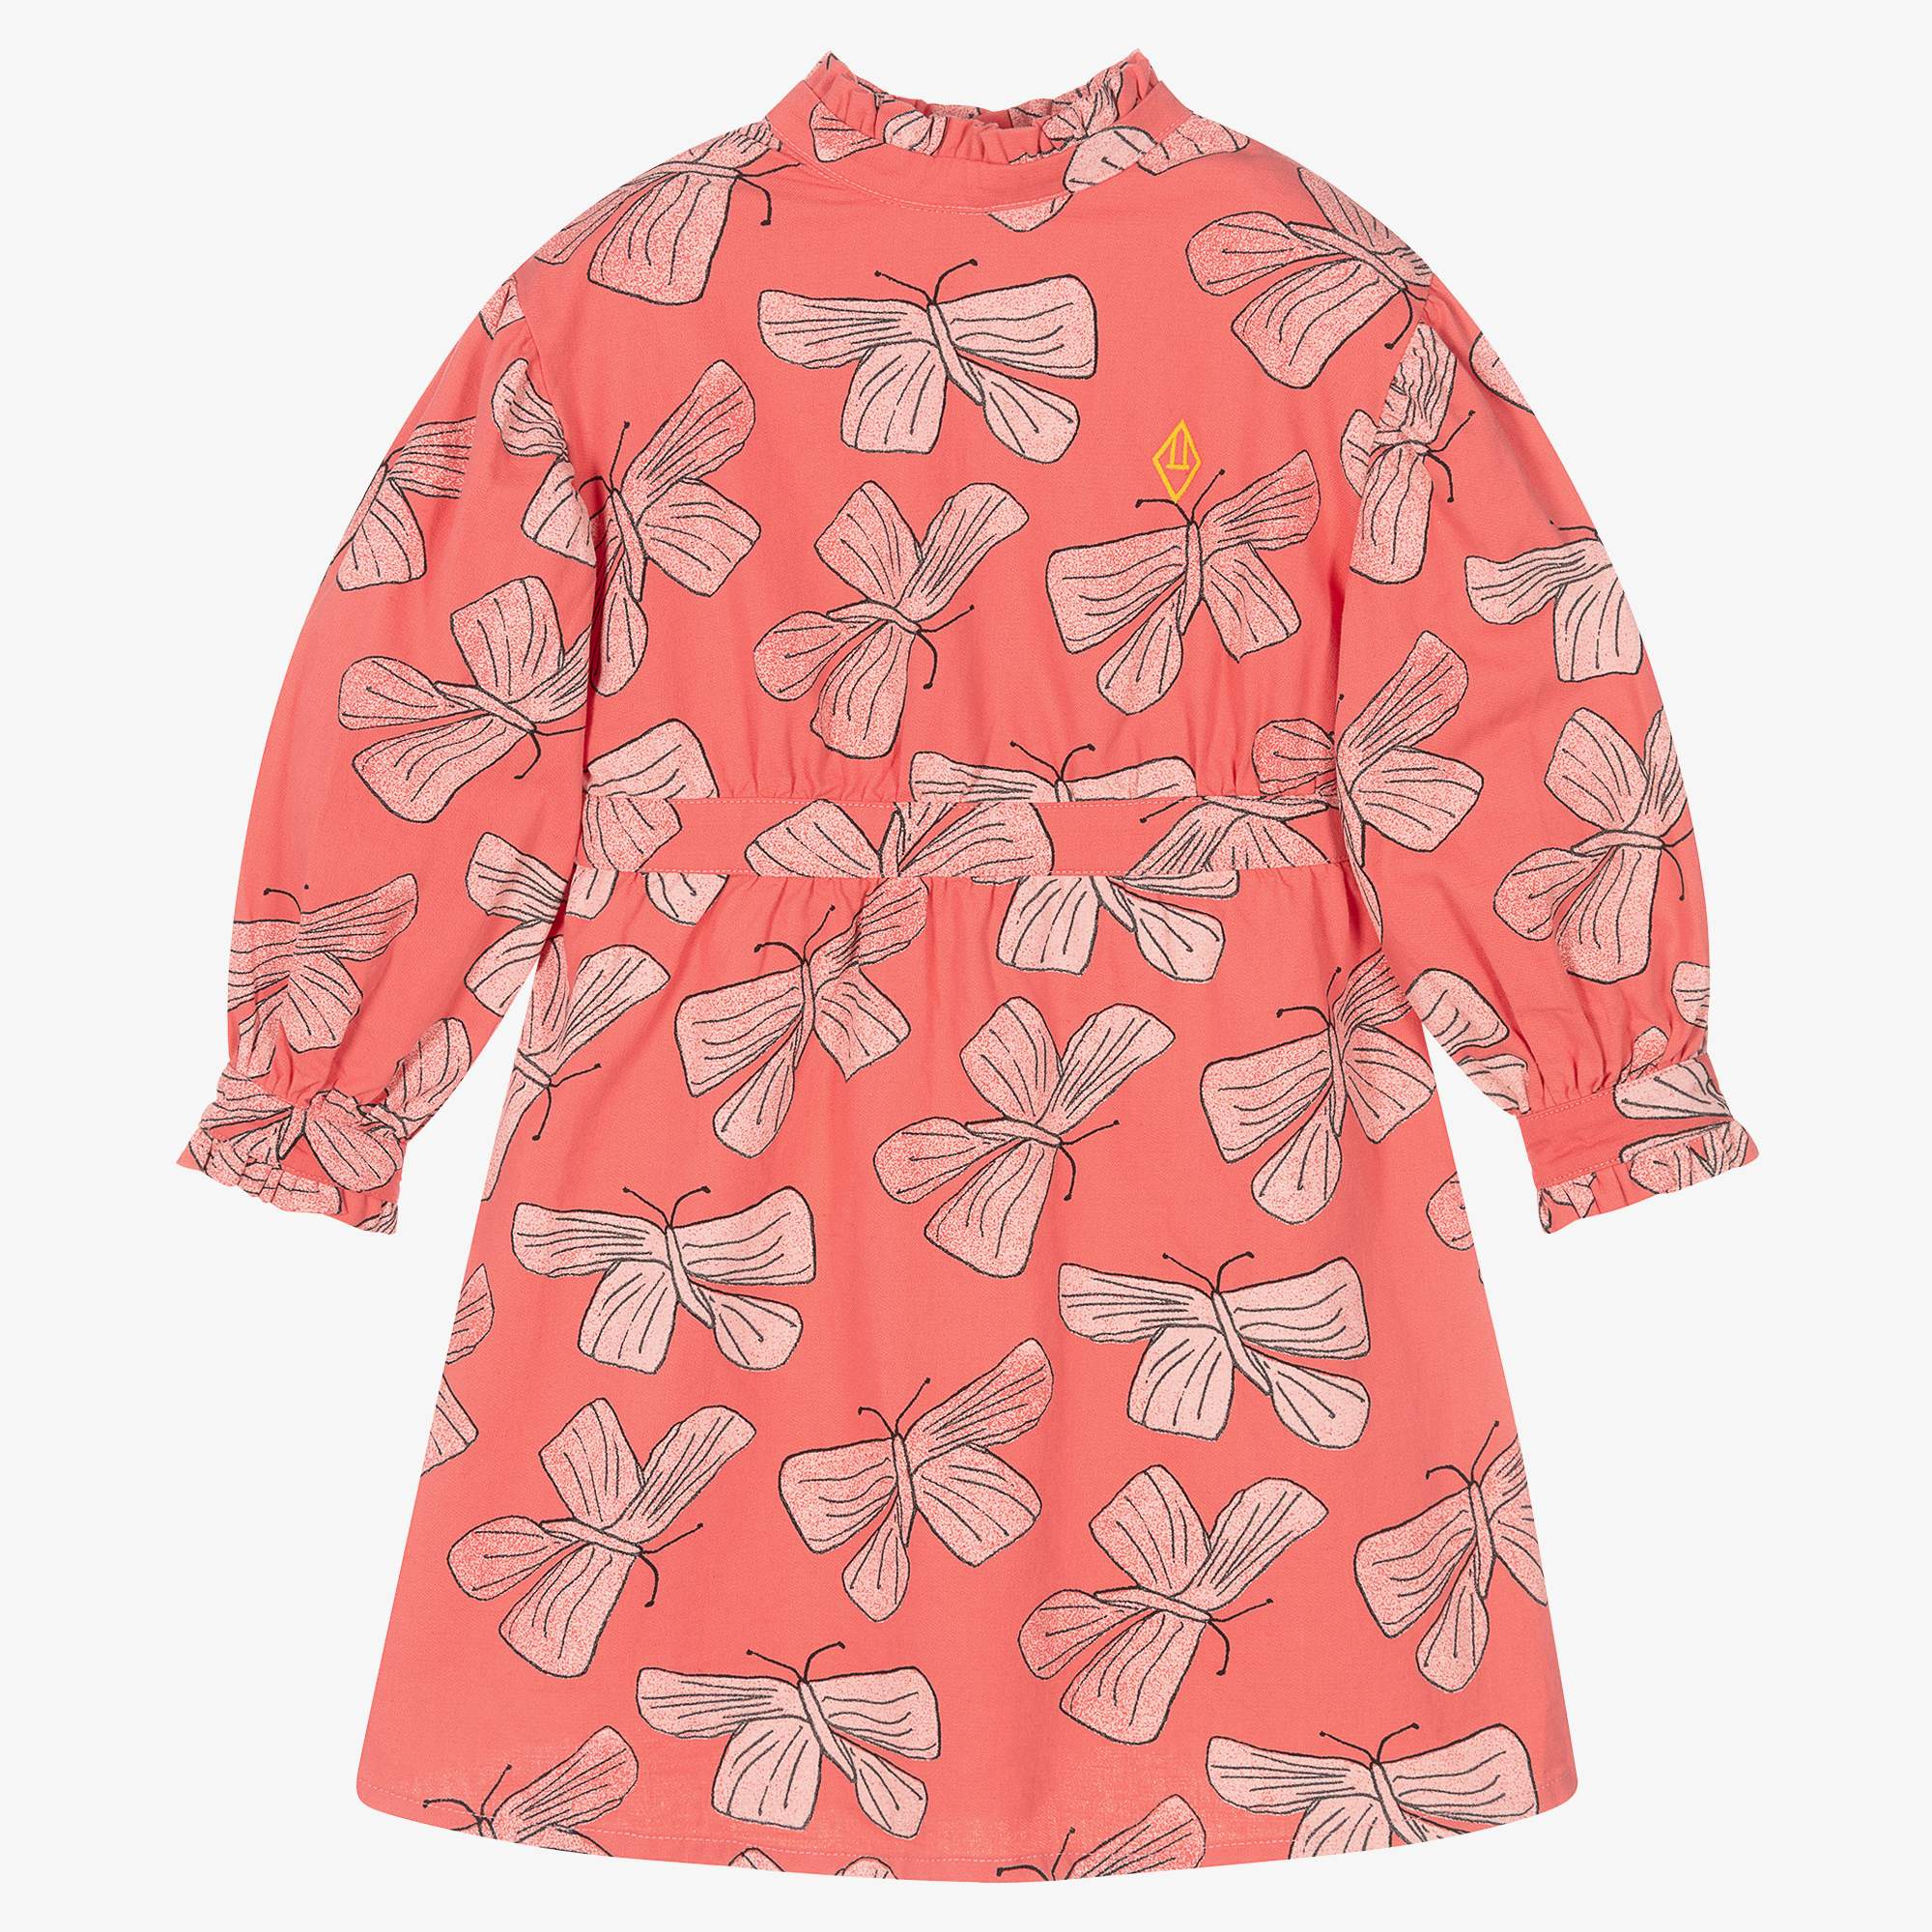 Herencia manga enchufe The Animals Observatory - Girls Pink Cotton Dress | Childrensalon Outlet